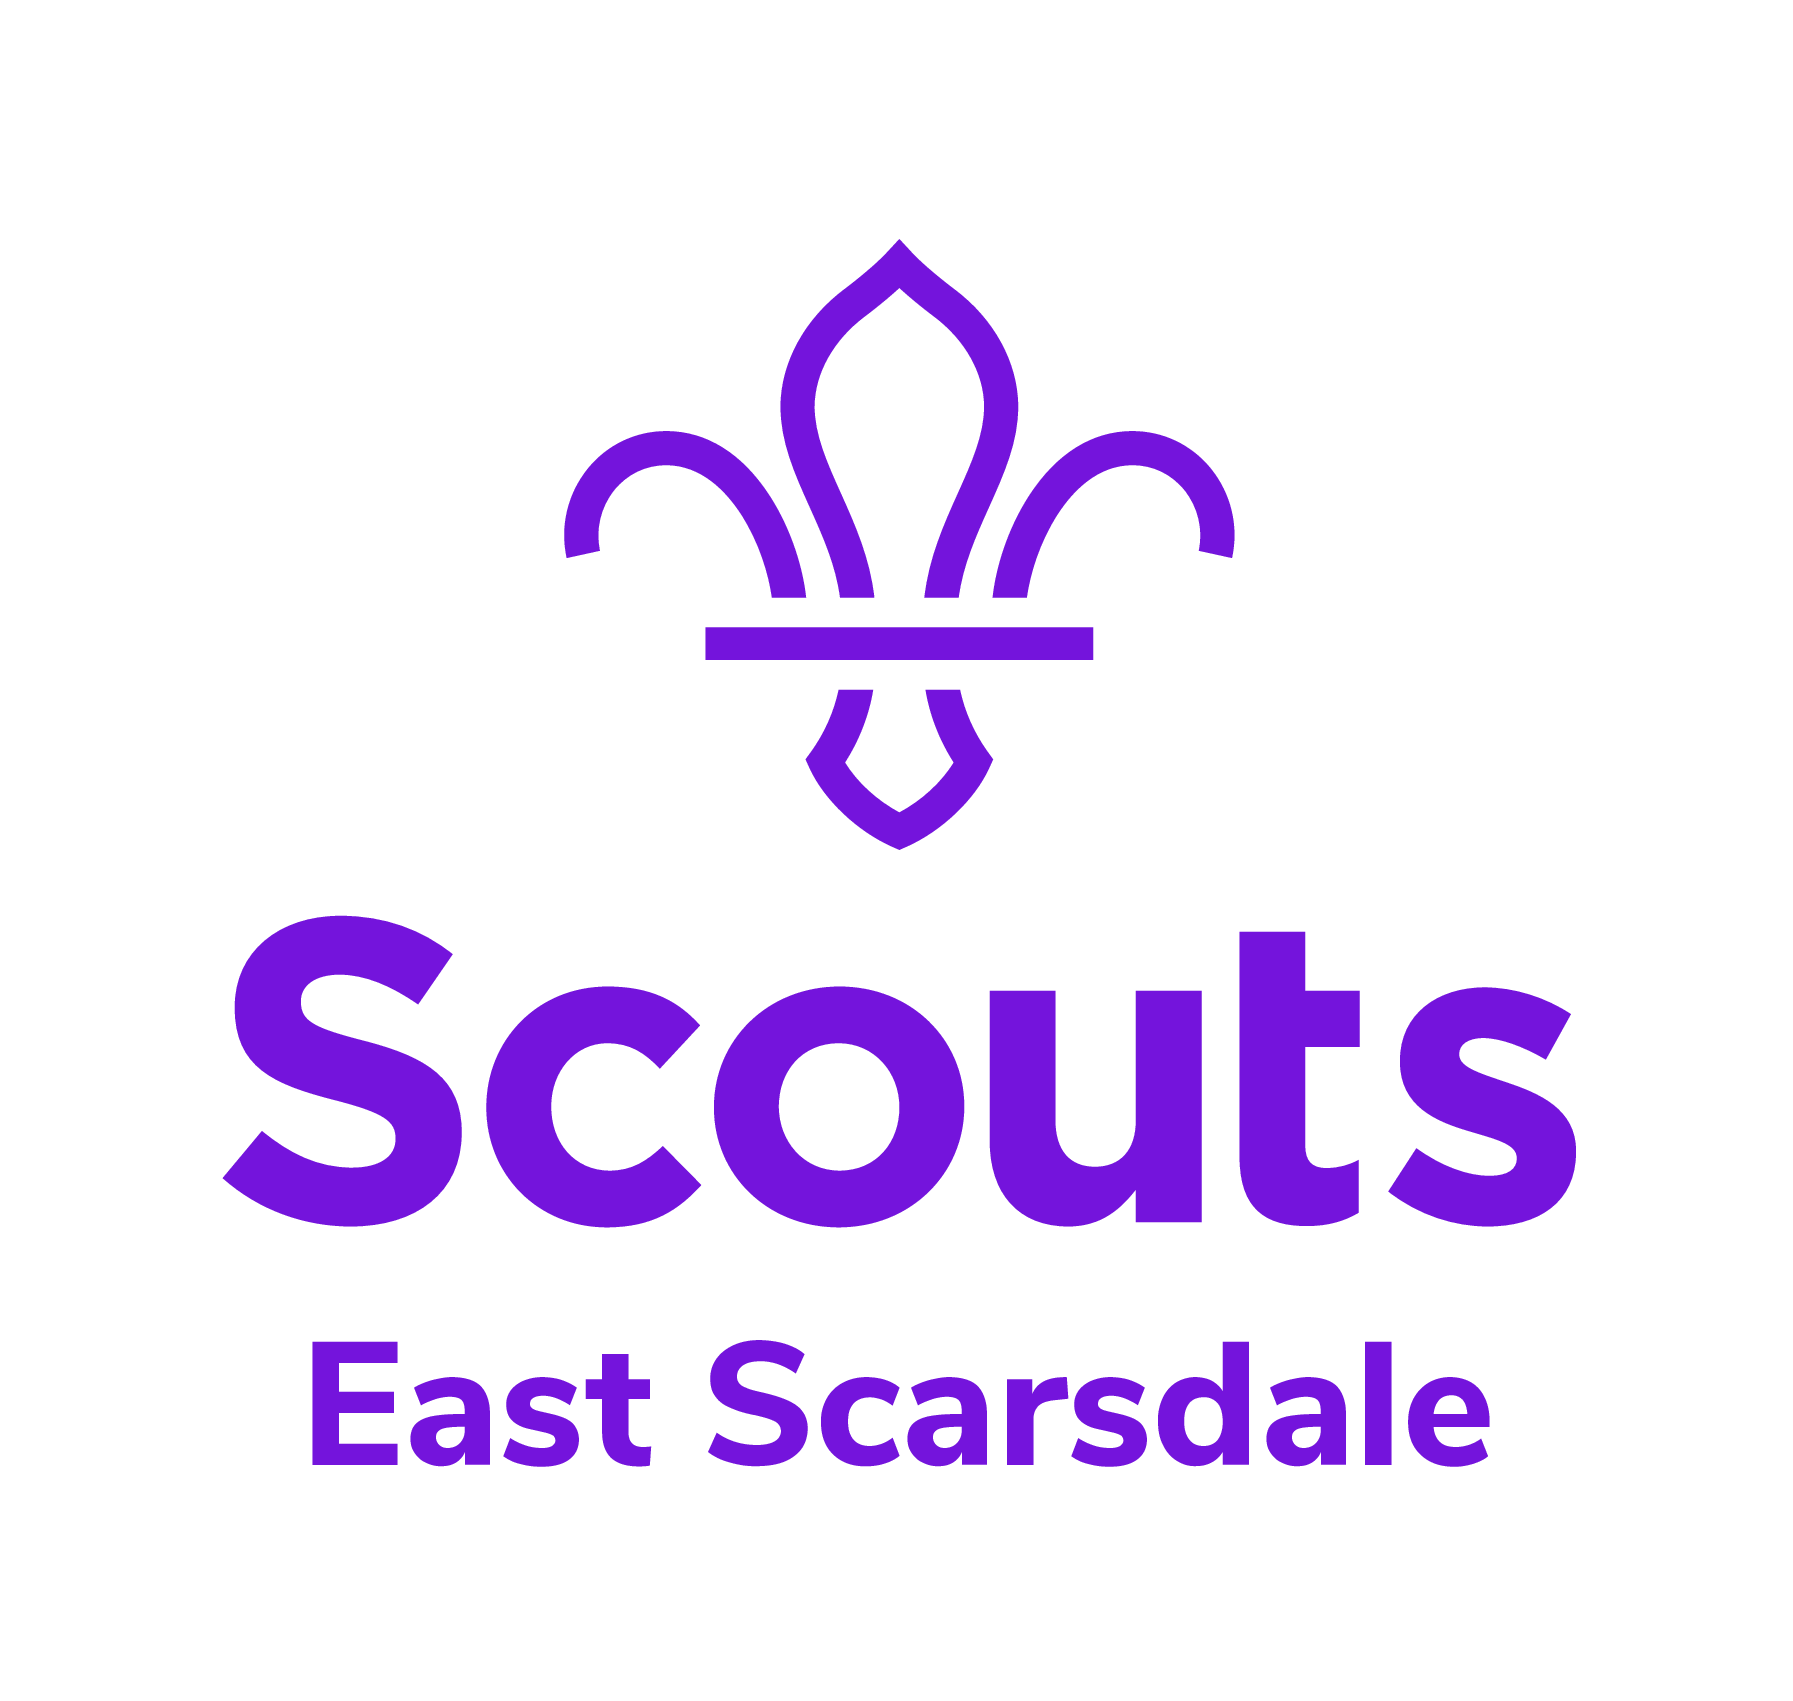 District Scout Network Commissioner